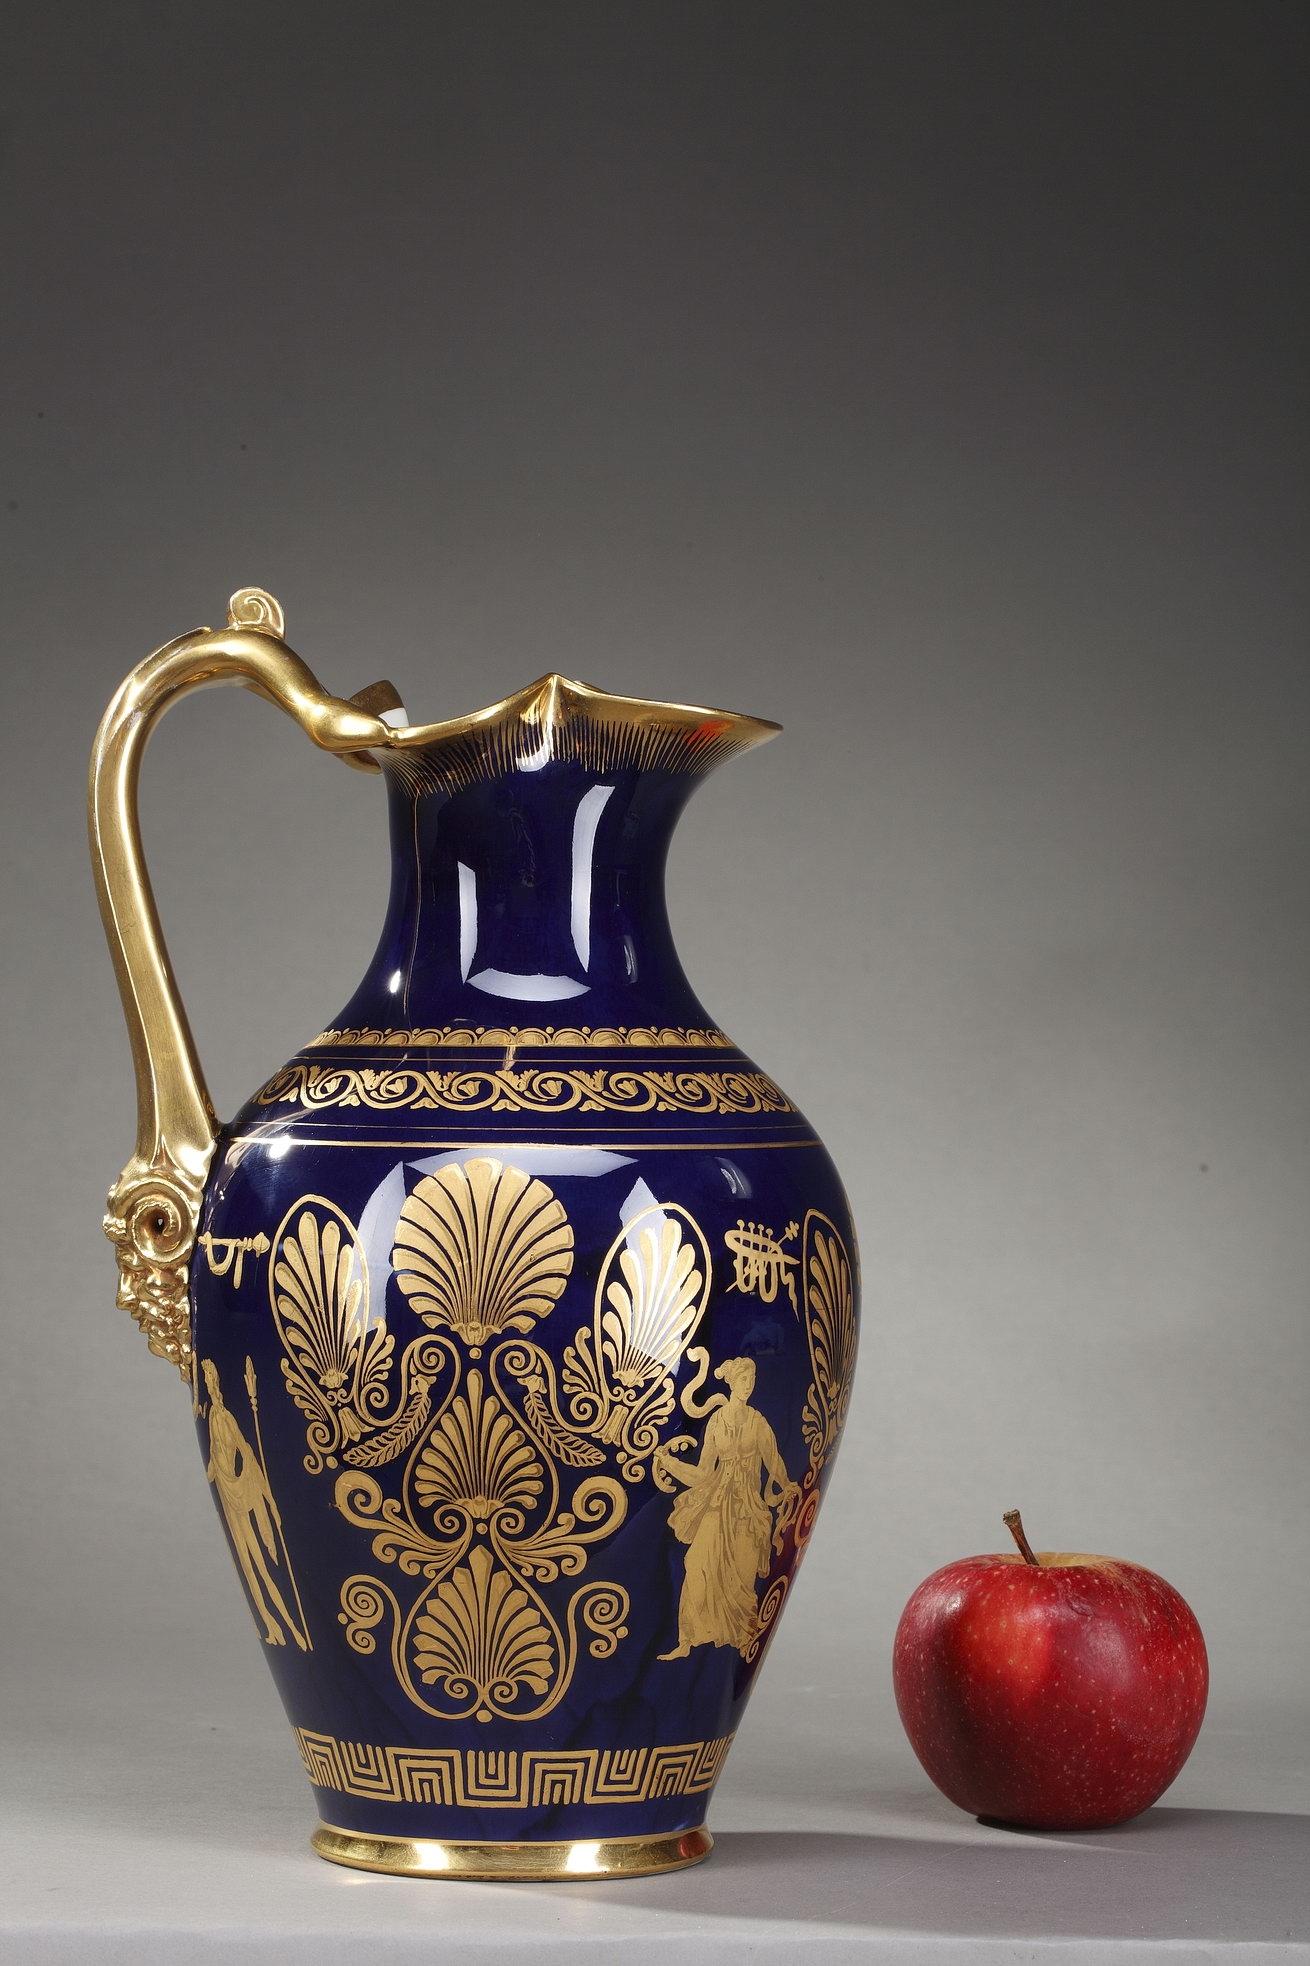 French Empire Porcelain Ewer with Antique Decoration